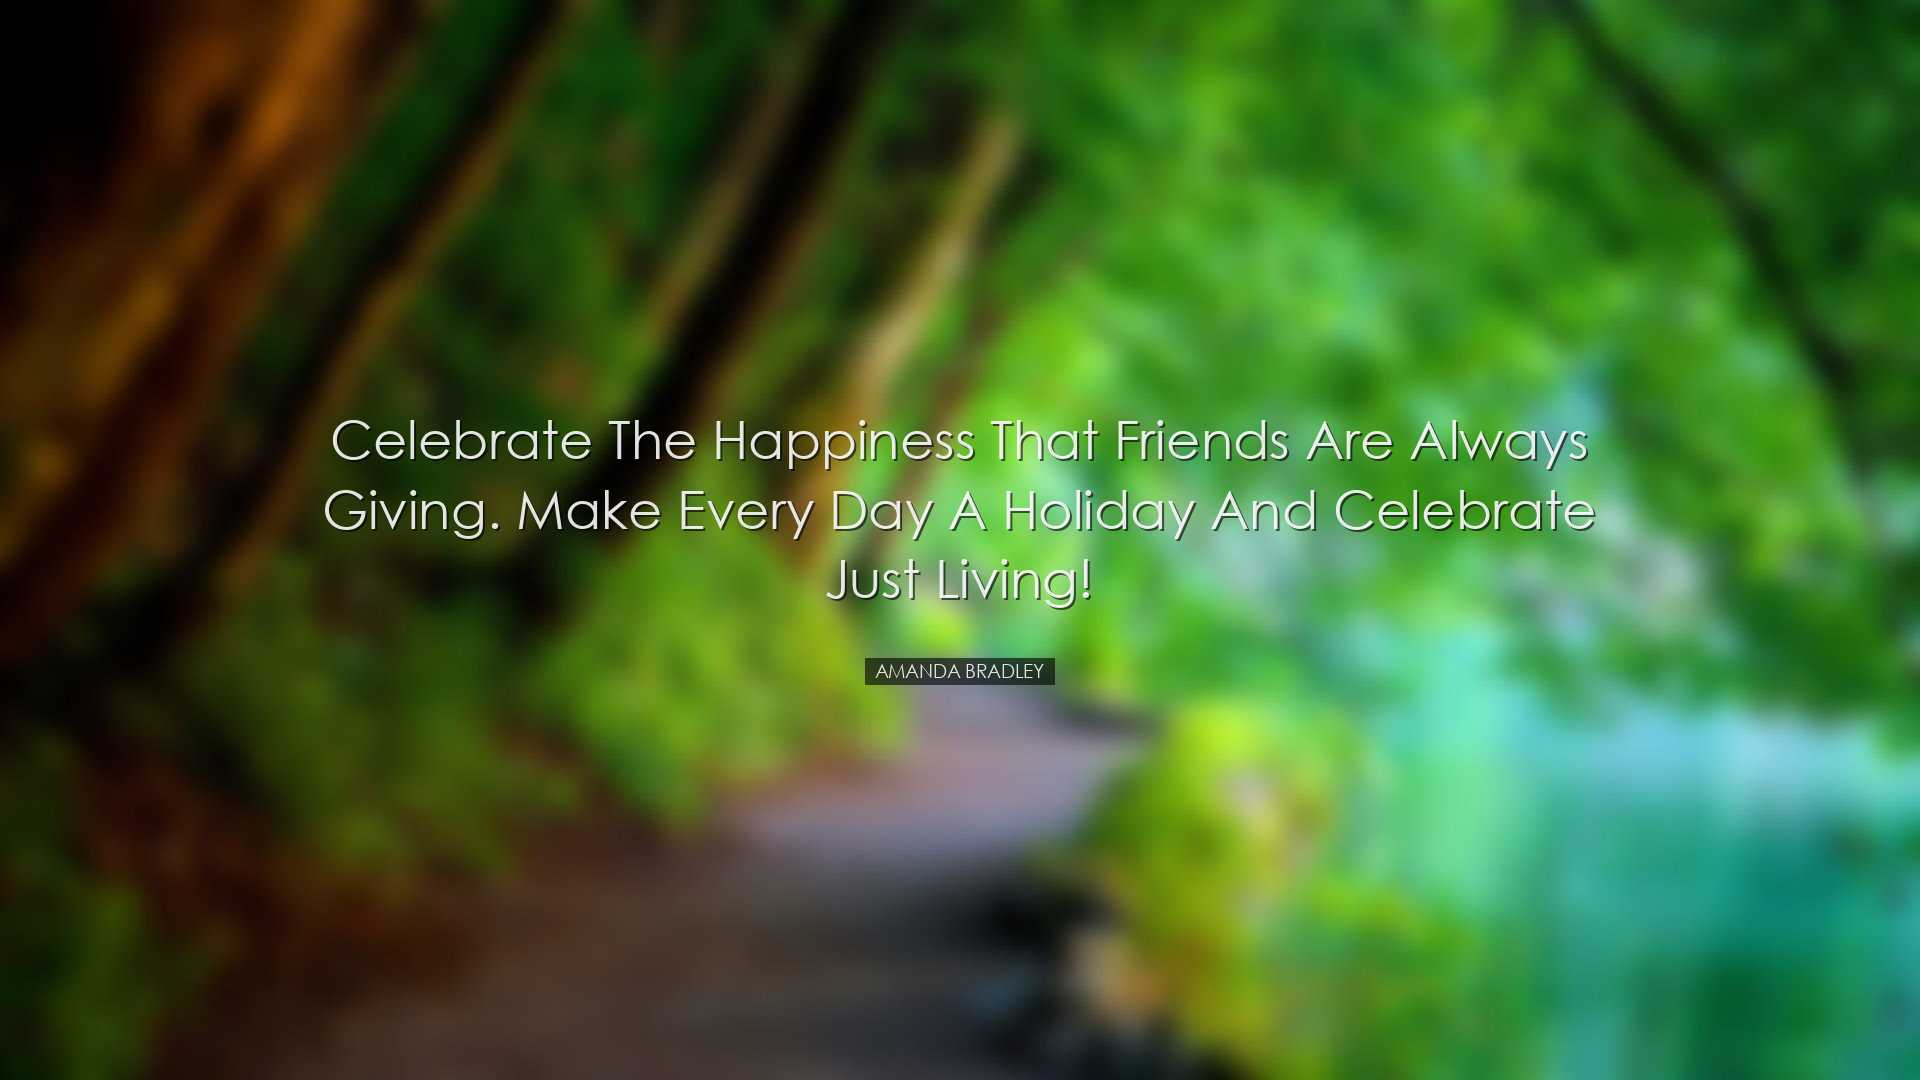 Celebrate the happiness that friends are always giving. Make every